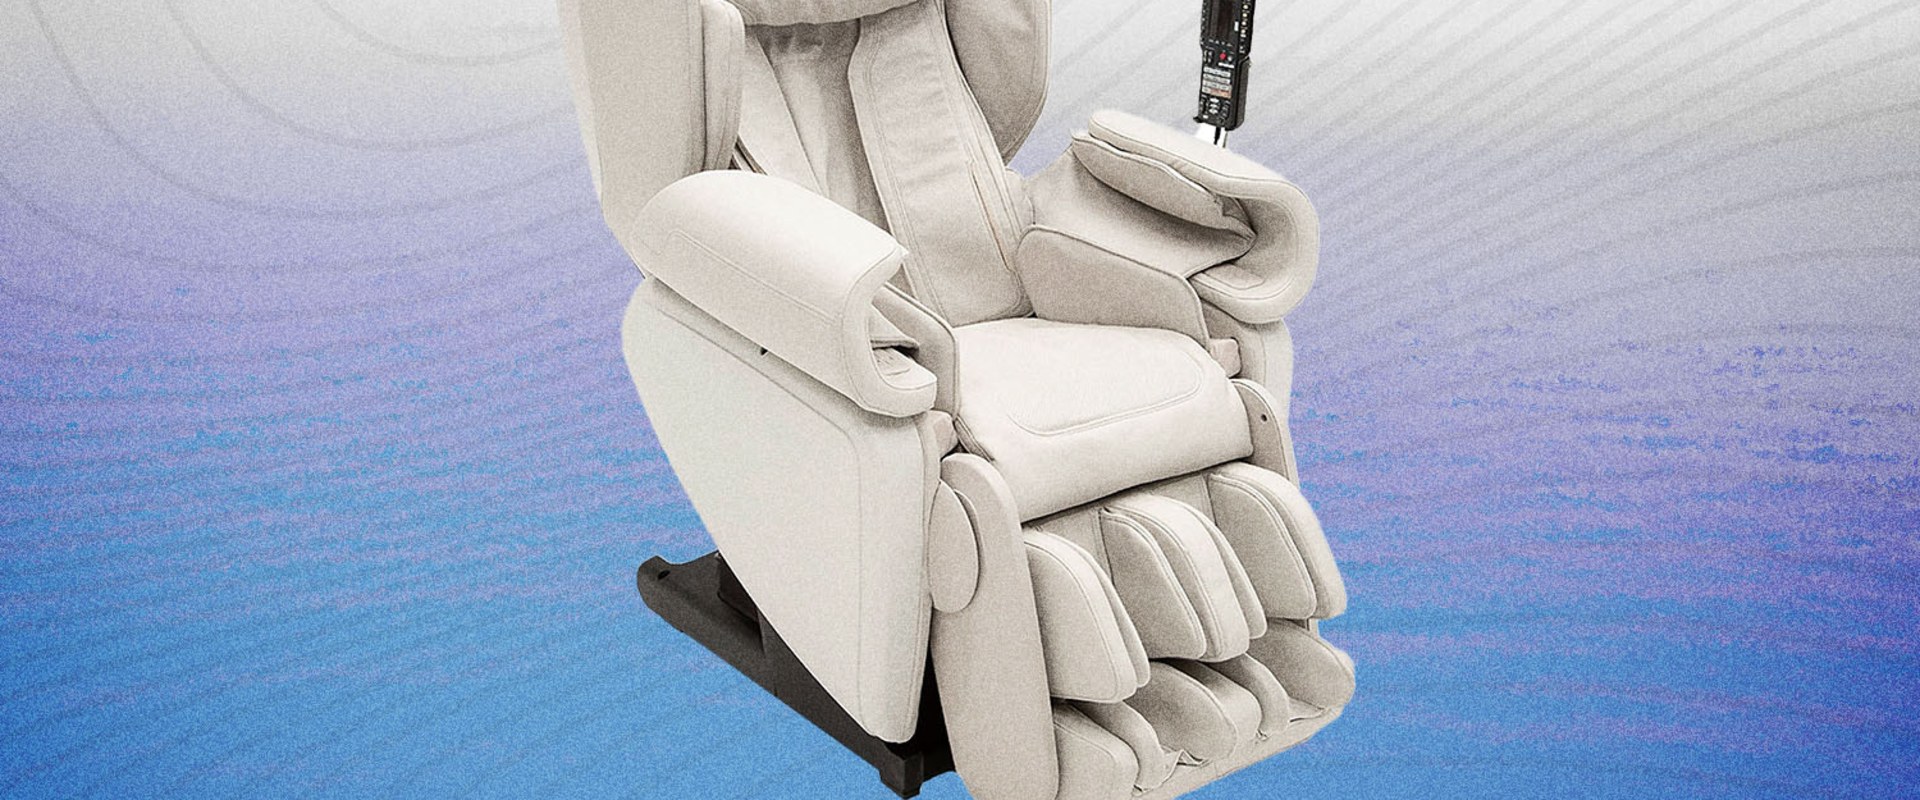 The Benefits of Using a Massage Chair Every Day